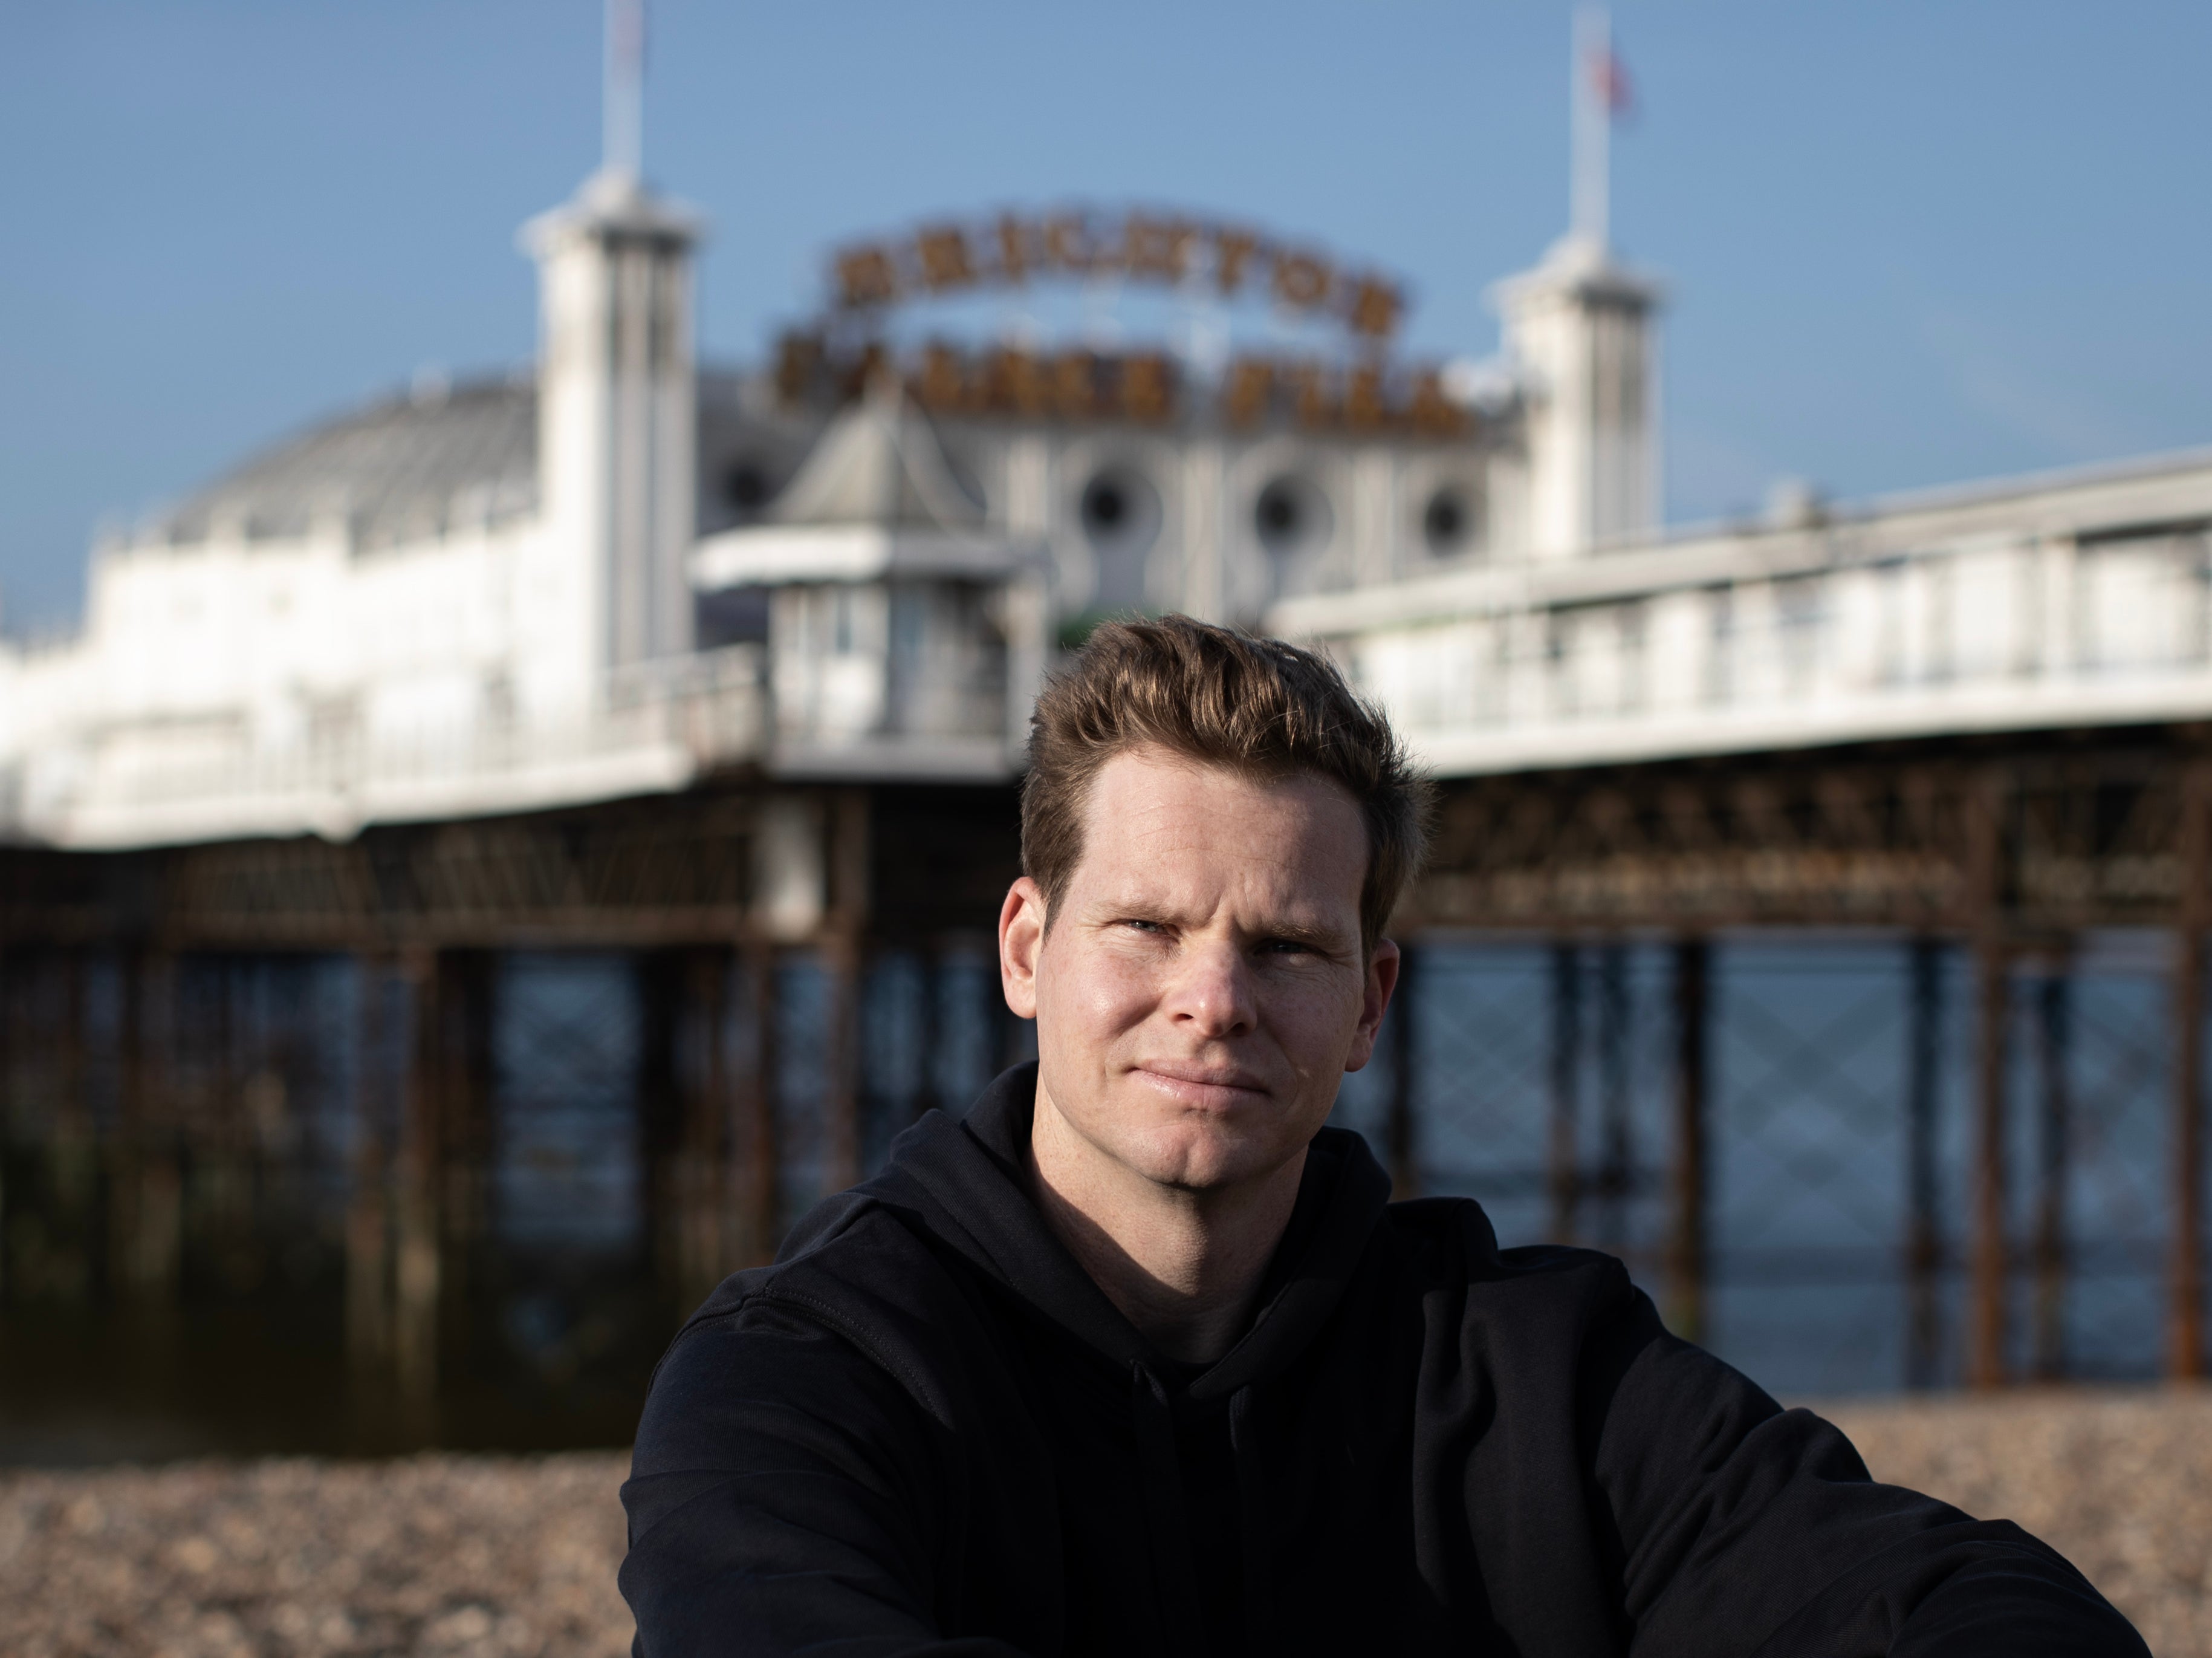 Australian Cricketer Steve Smith poses near Brighton Palace Pier as he joins Sussex CCC